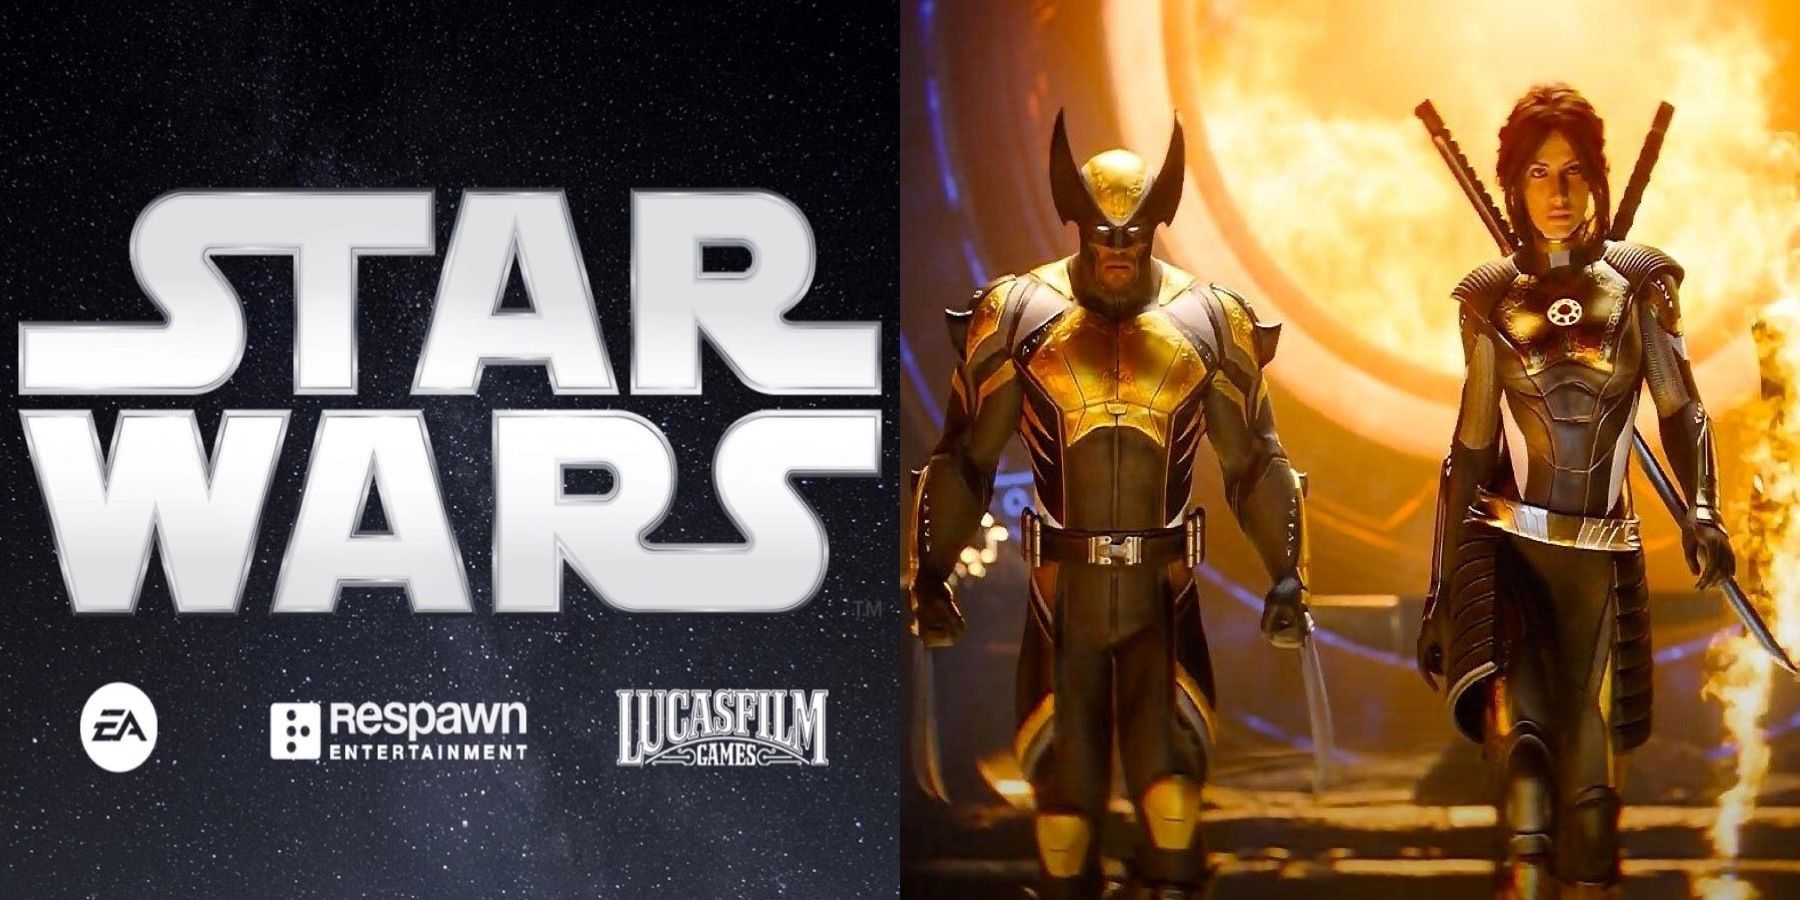 Wolverine and the Marvel's Midnight Suns protagonist next to the Star Wars logo